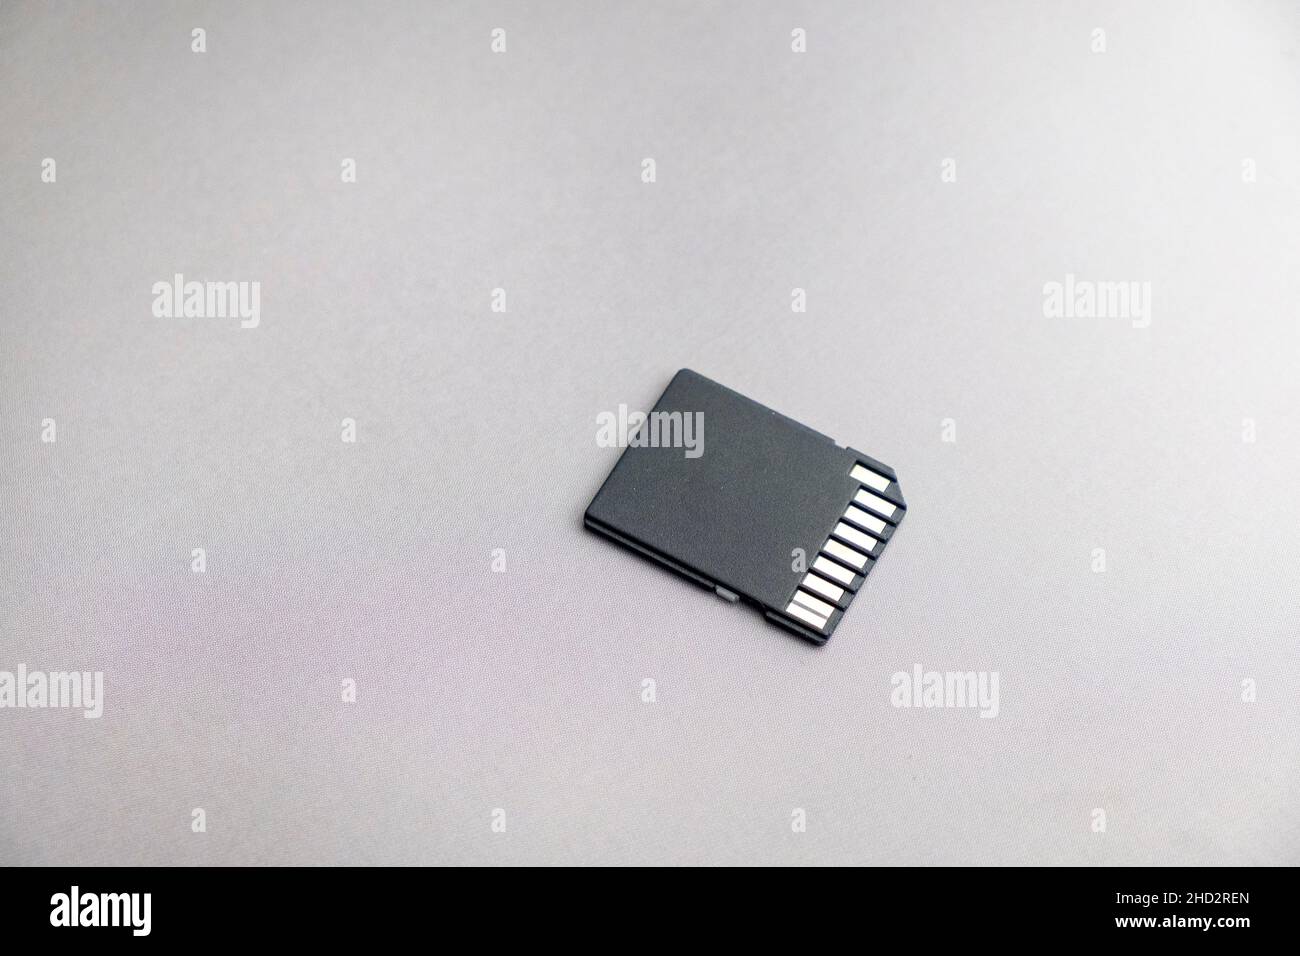 black micro sd card with gold contacts on a gray metallic surface, selective focus, macro Stock Photo